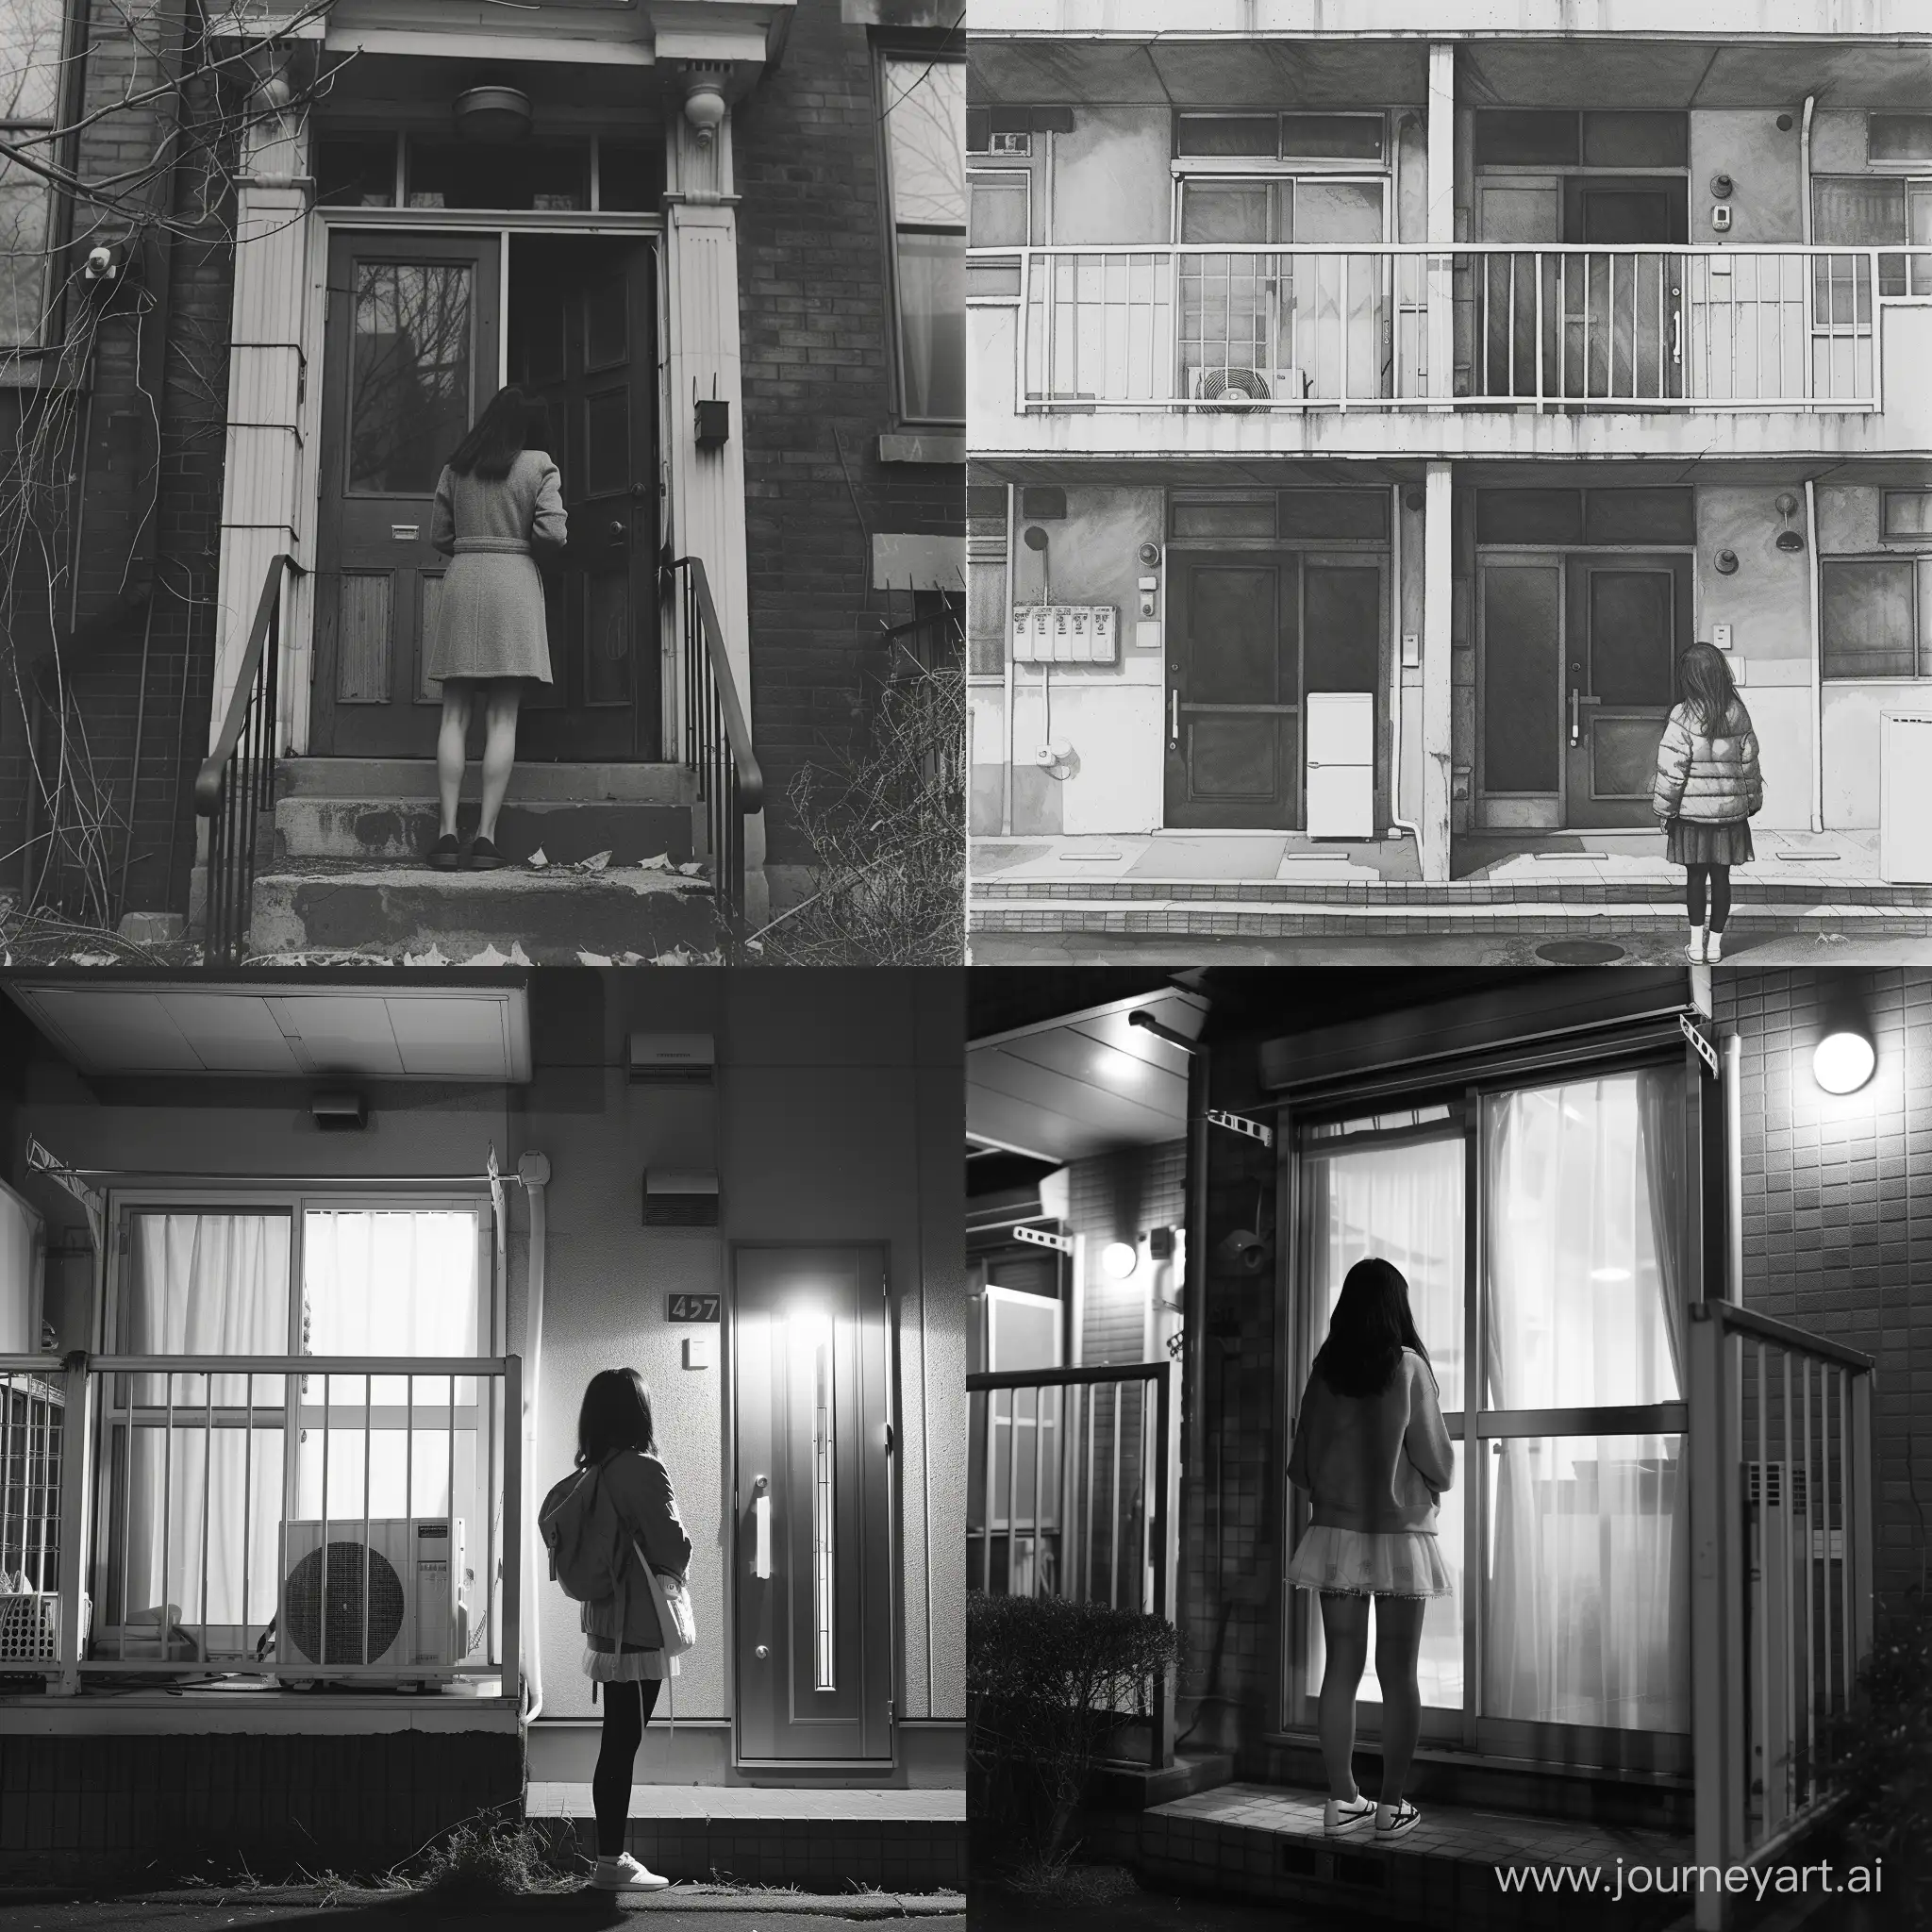 Young-Girl-Standing-in-Front-of-an-Apartment-Building-in-Outerwear